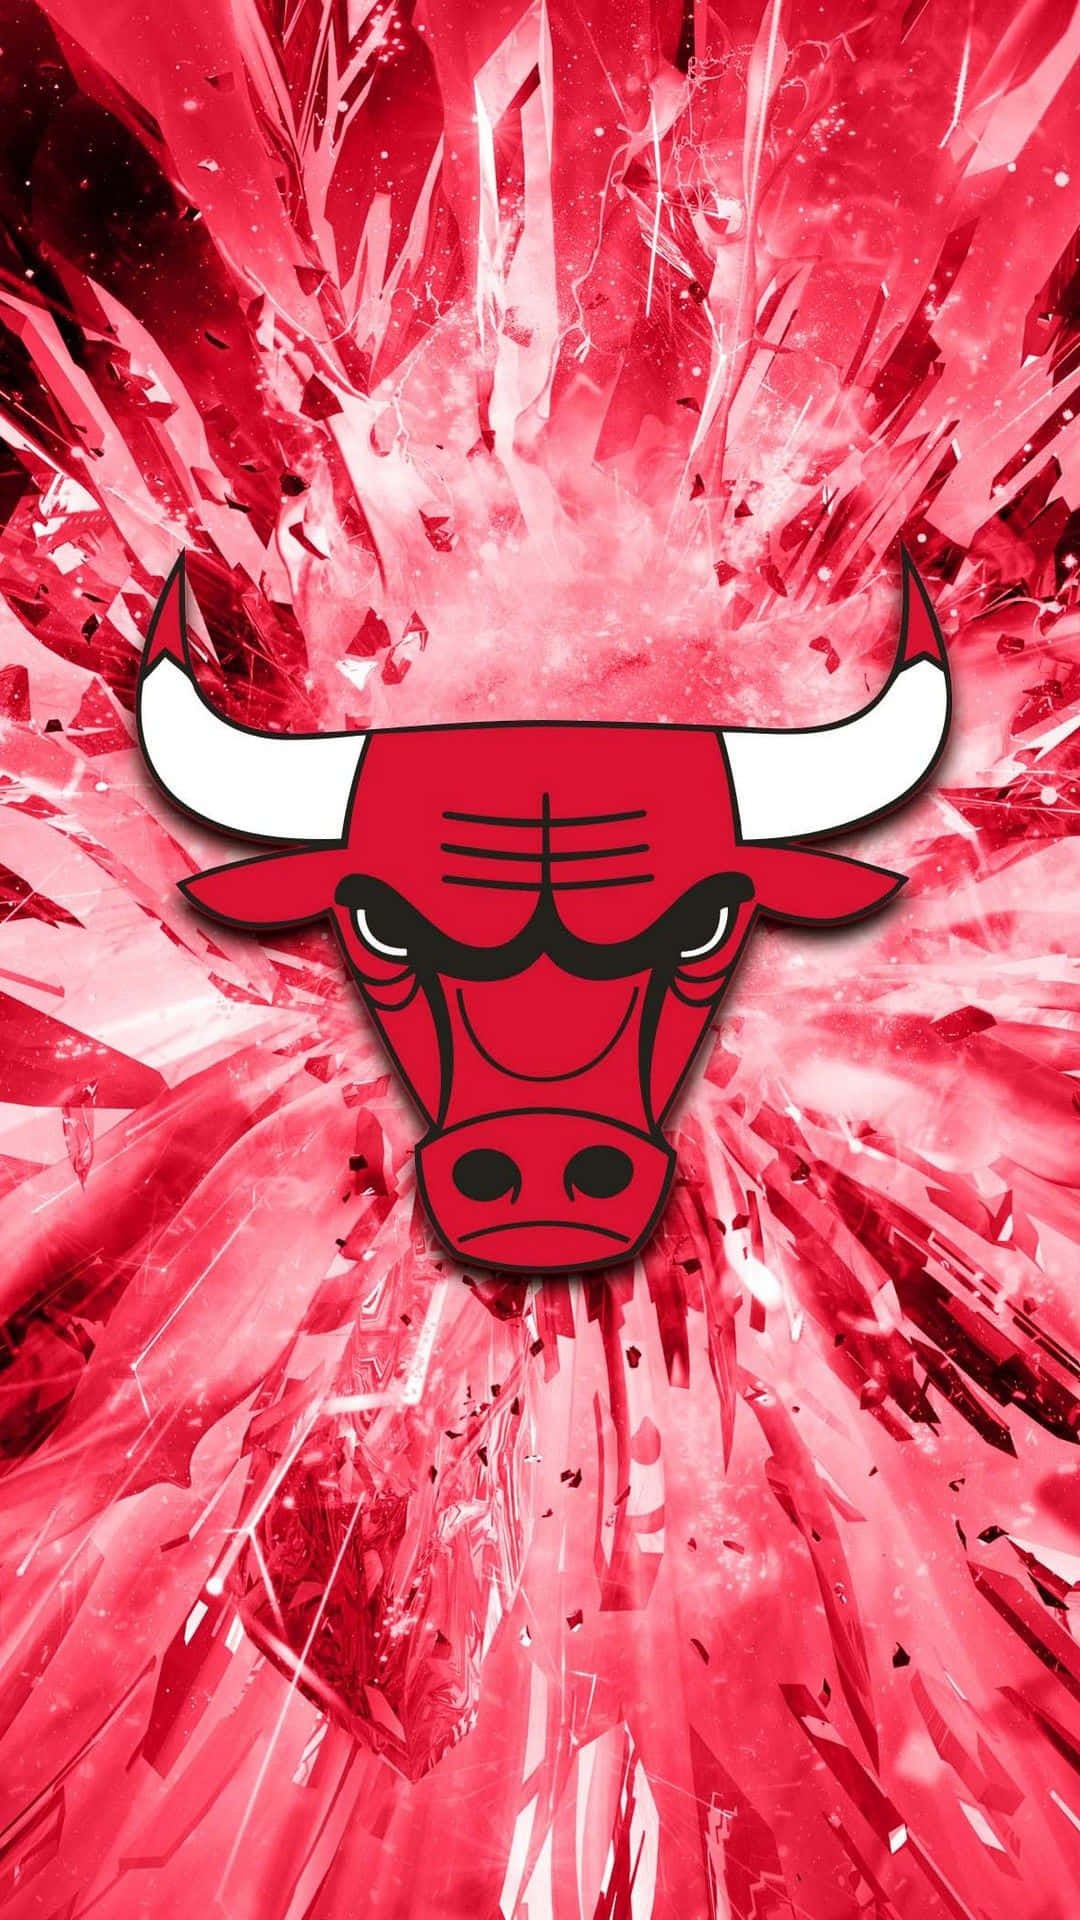 Feel the rush of being a Chicago Bulls fan with this official phone case Wallpaper